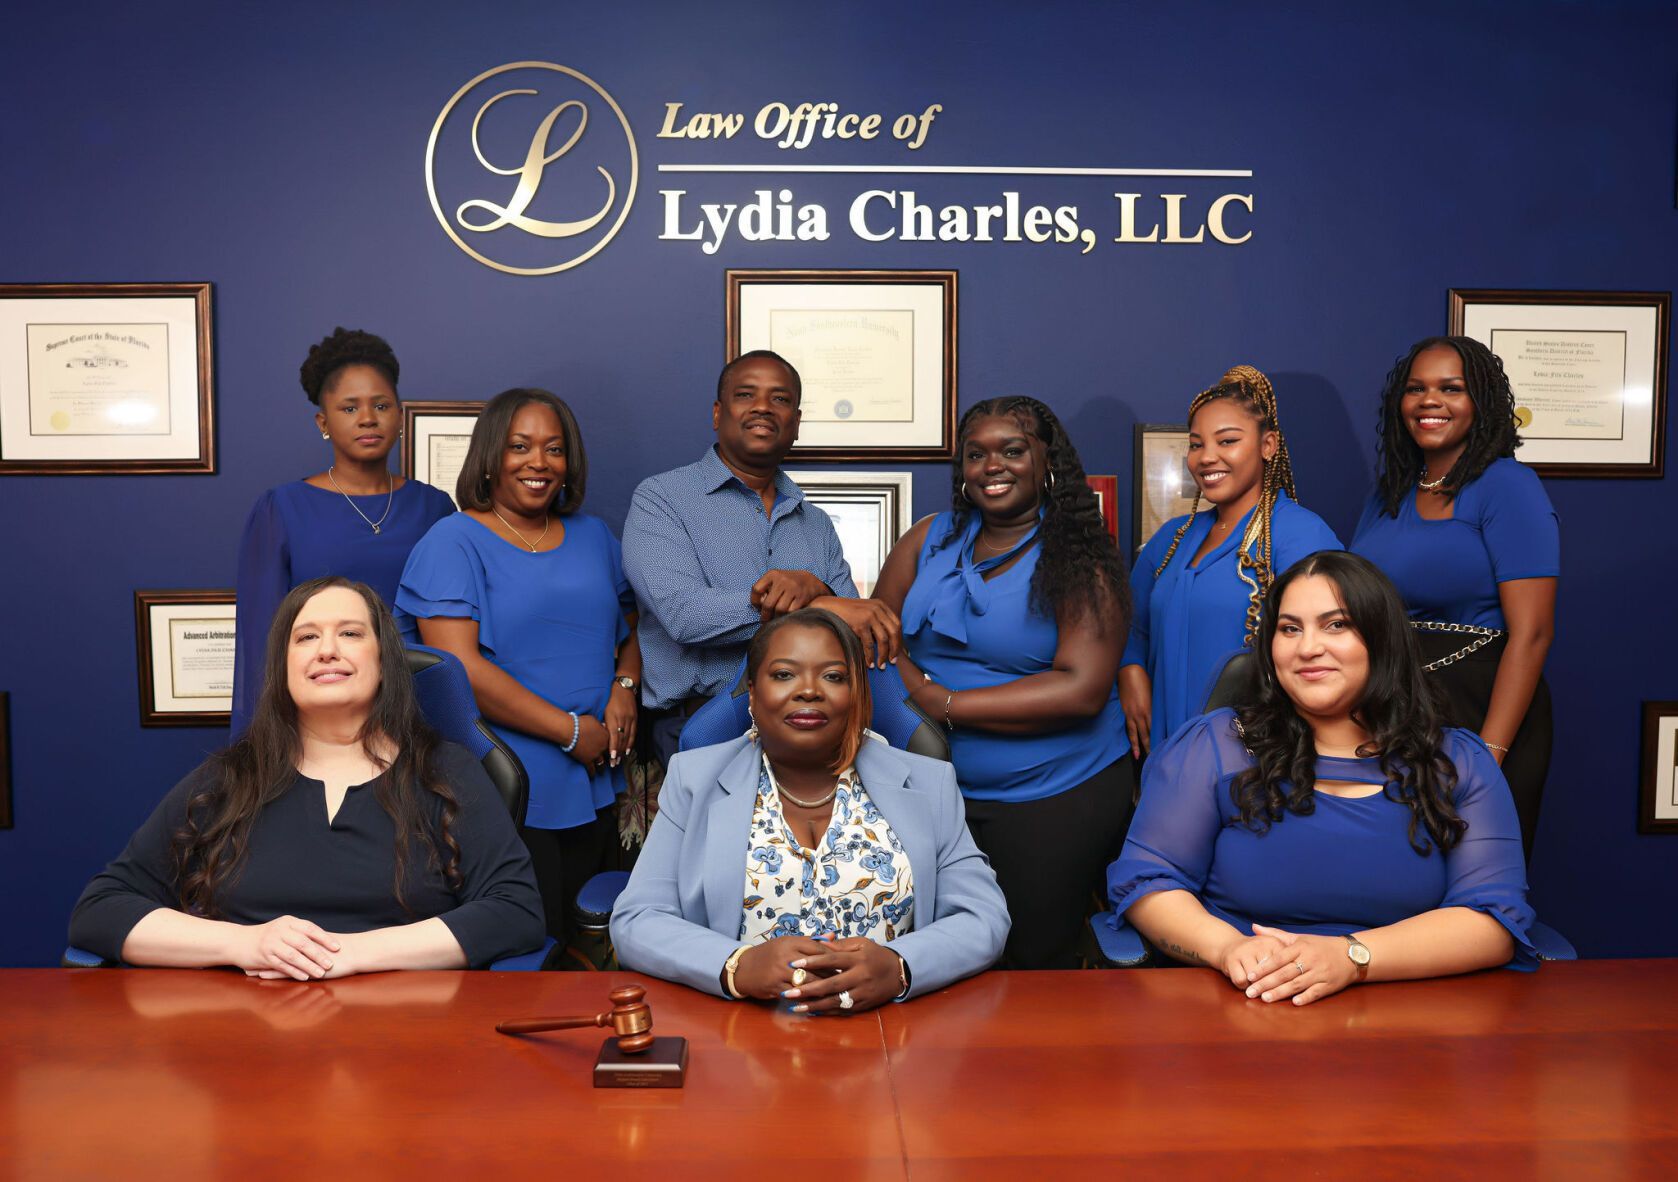 Law Office of Lydia Charles, LLC group image